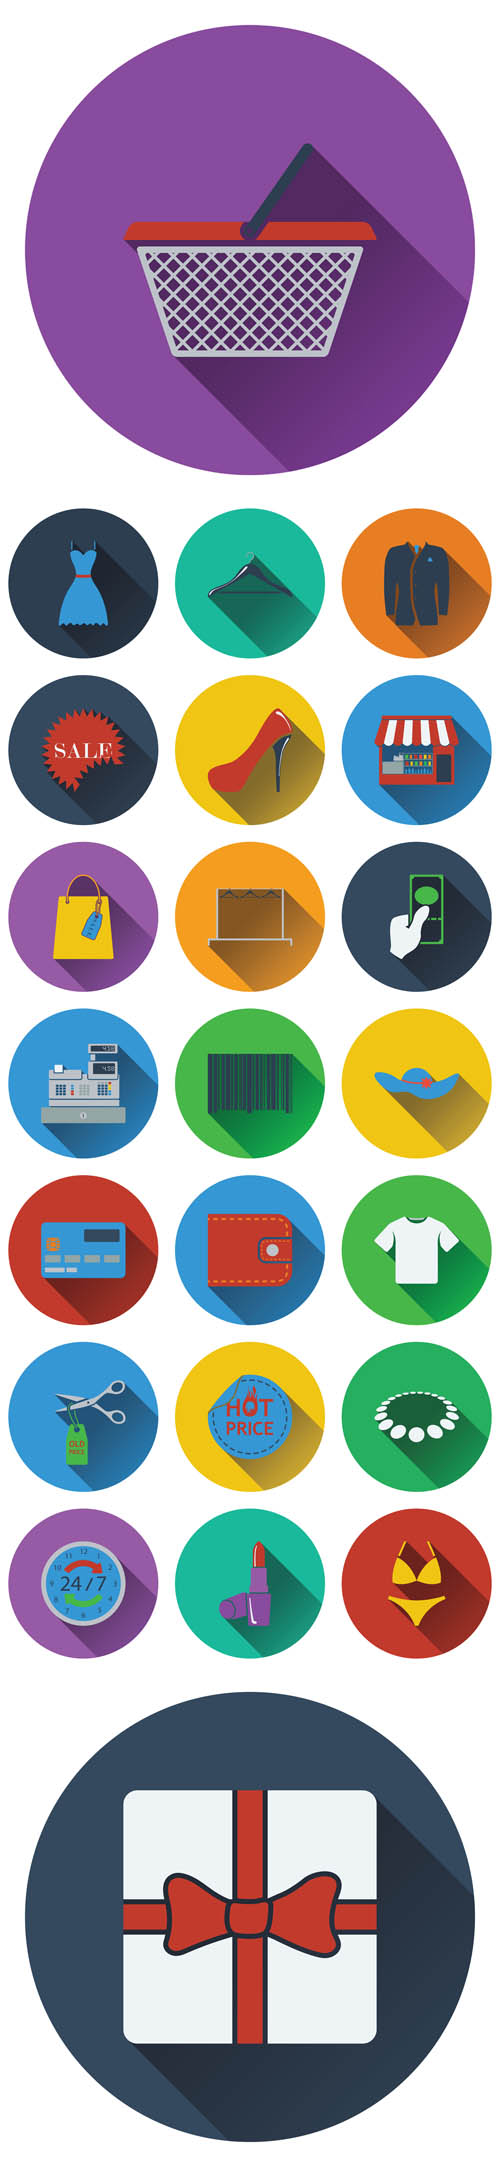 Vectors - Flat Round Shopping Icons